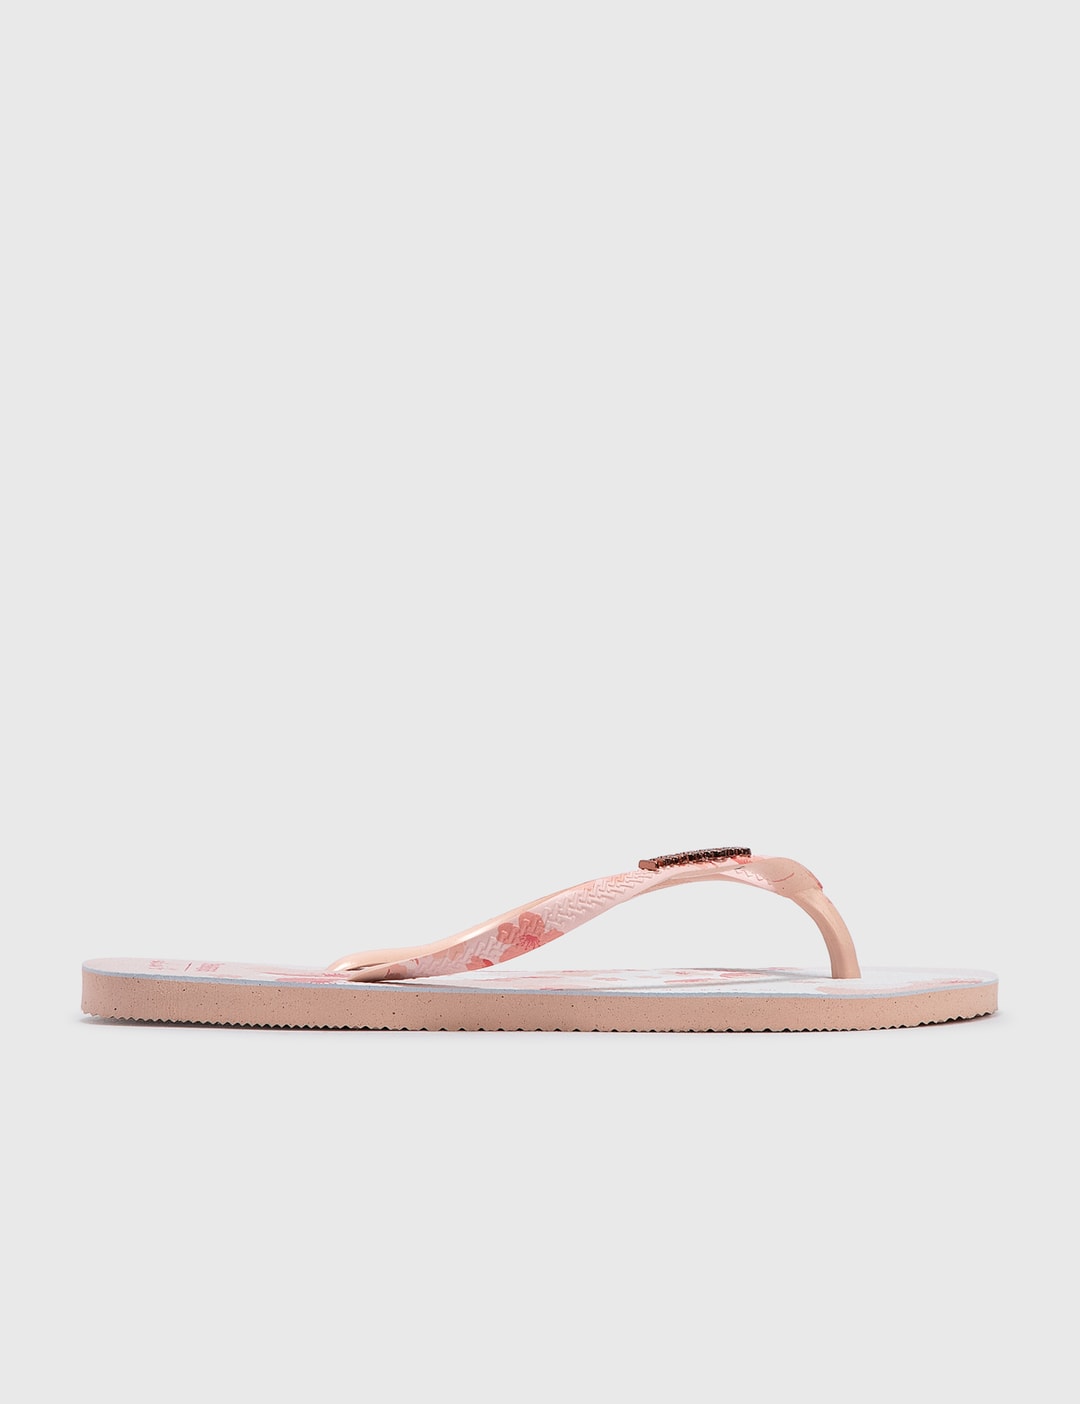 Havaianas Slim Sakura Flip Flops | HBX - Globally Curated Fashion and Lifestyle by Hypebeast